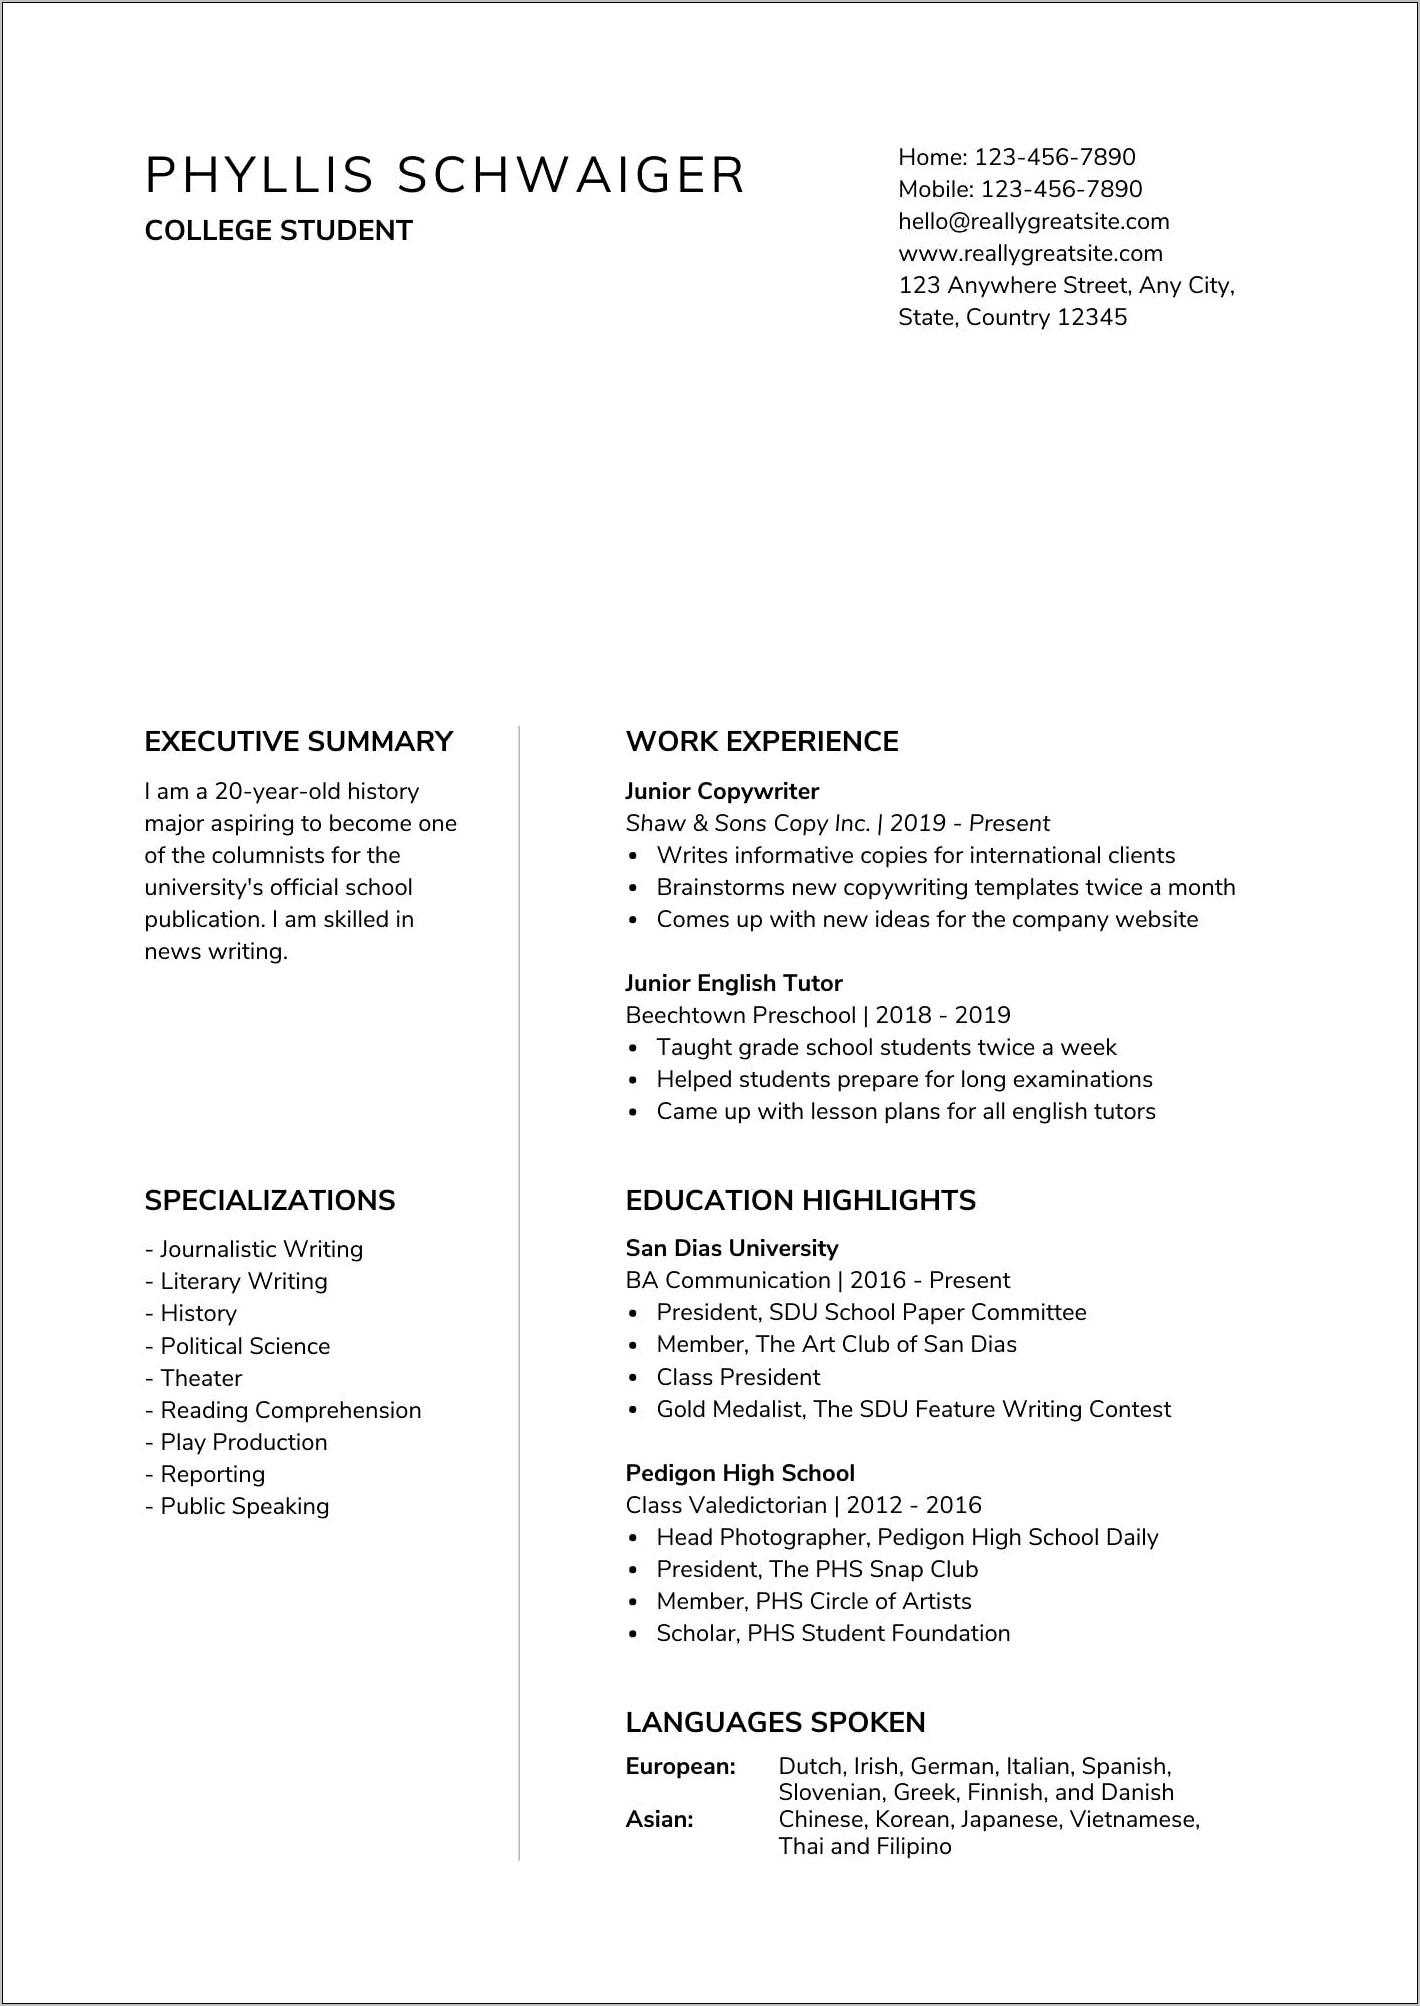 Sample Resume For Fresh Graduate With Ojt Experience